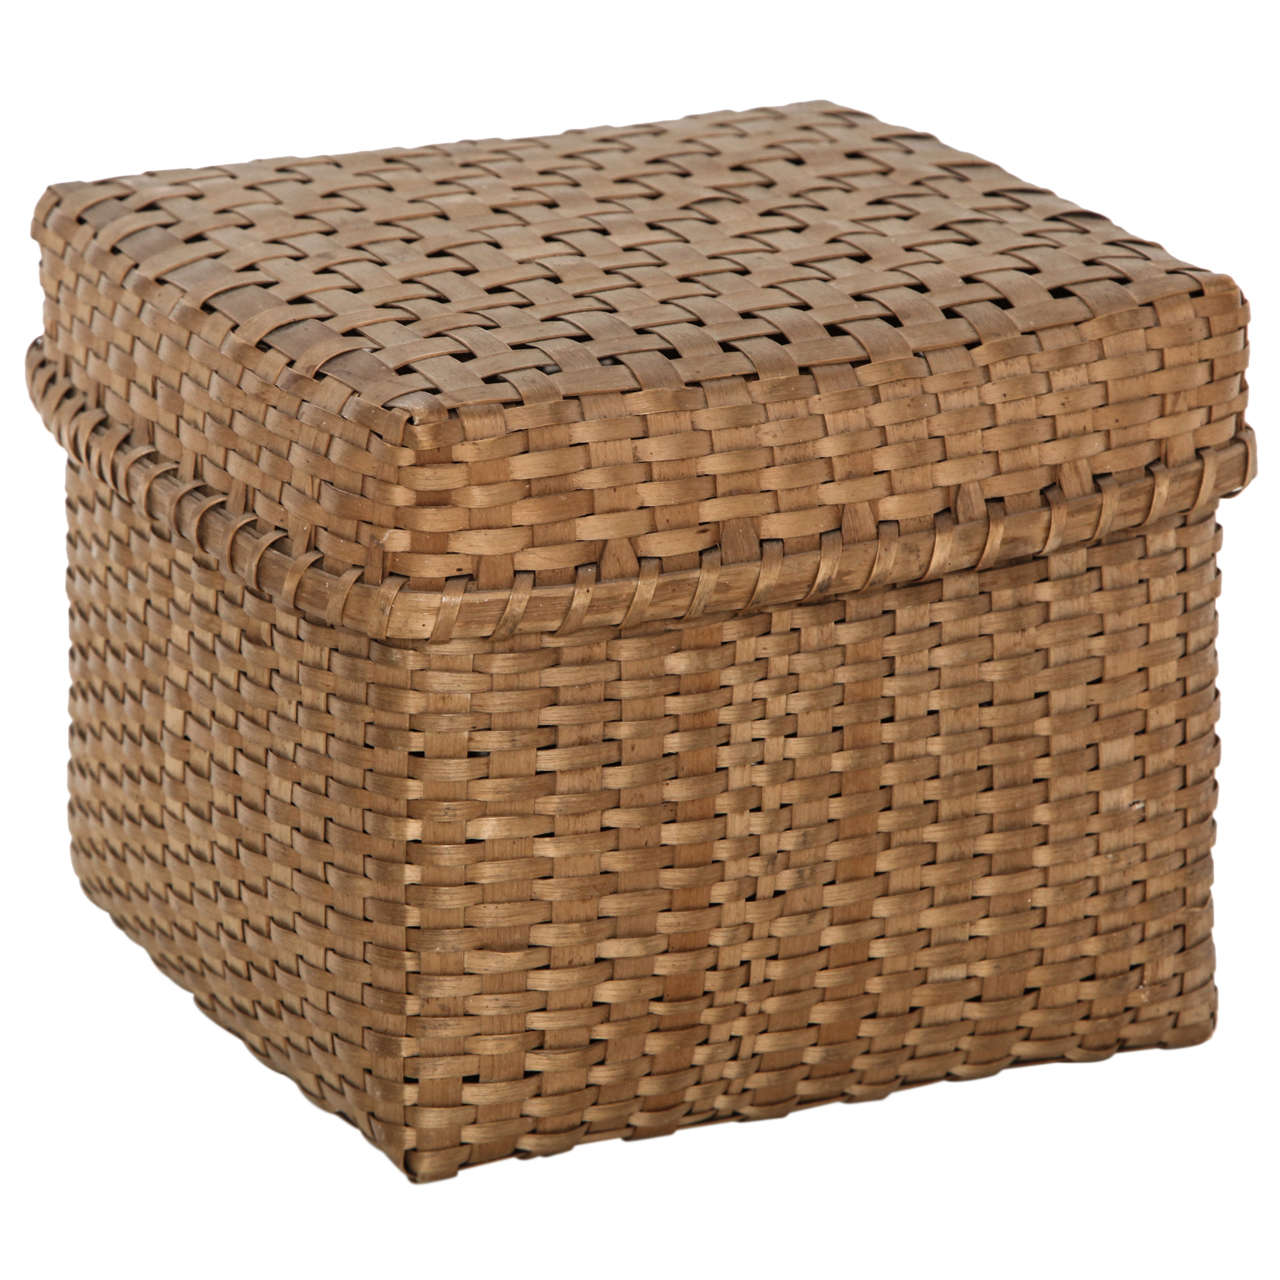 Small Lidded Woven Basket, Late 19th c.